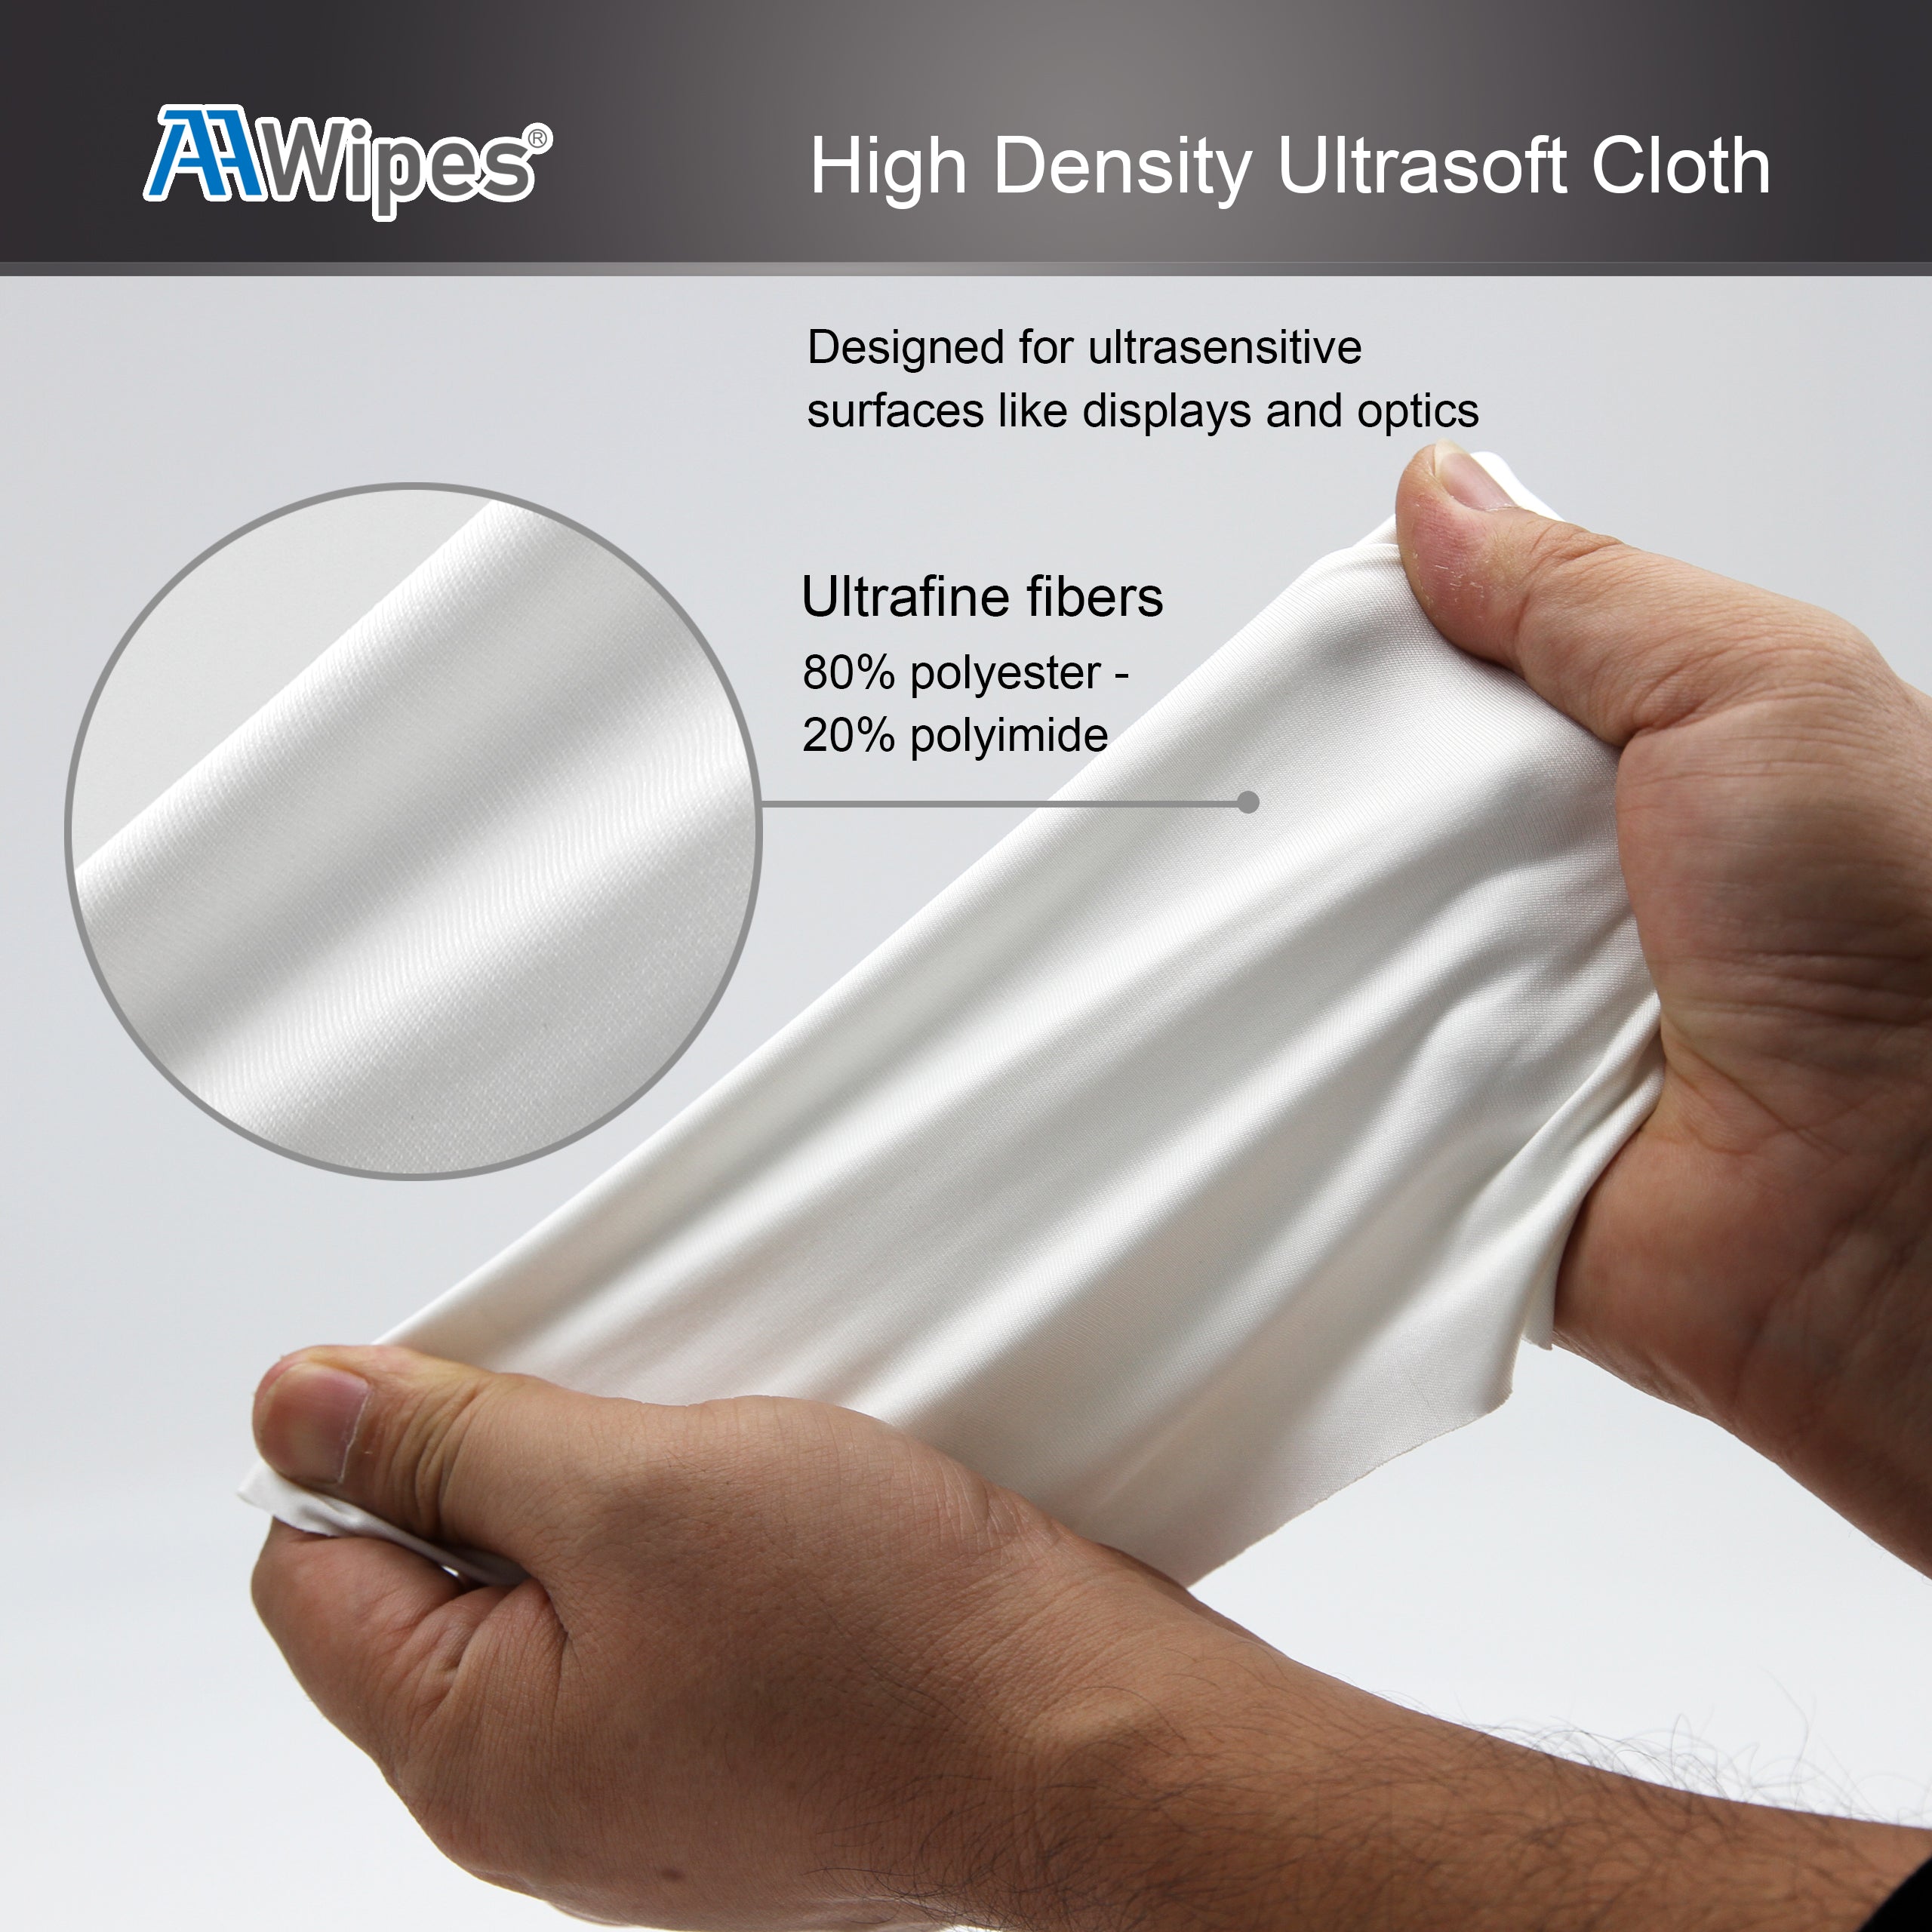 AAwipes microfiber cleanroom wipes, specially designed with a high-density ultrasoft cloth, designed for ultrasensitive surface like display and optics.